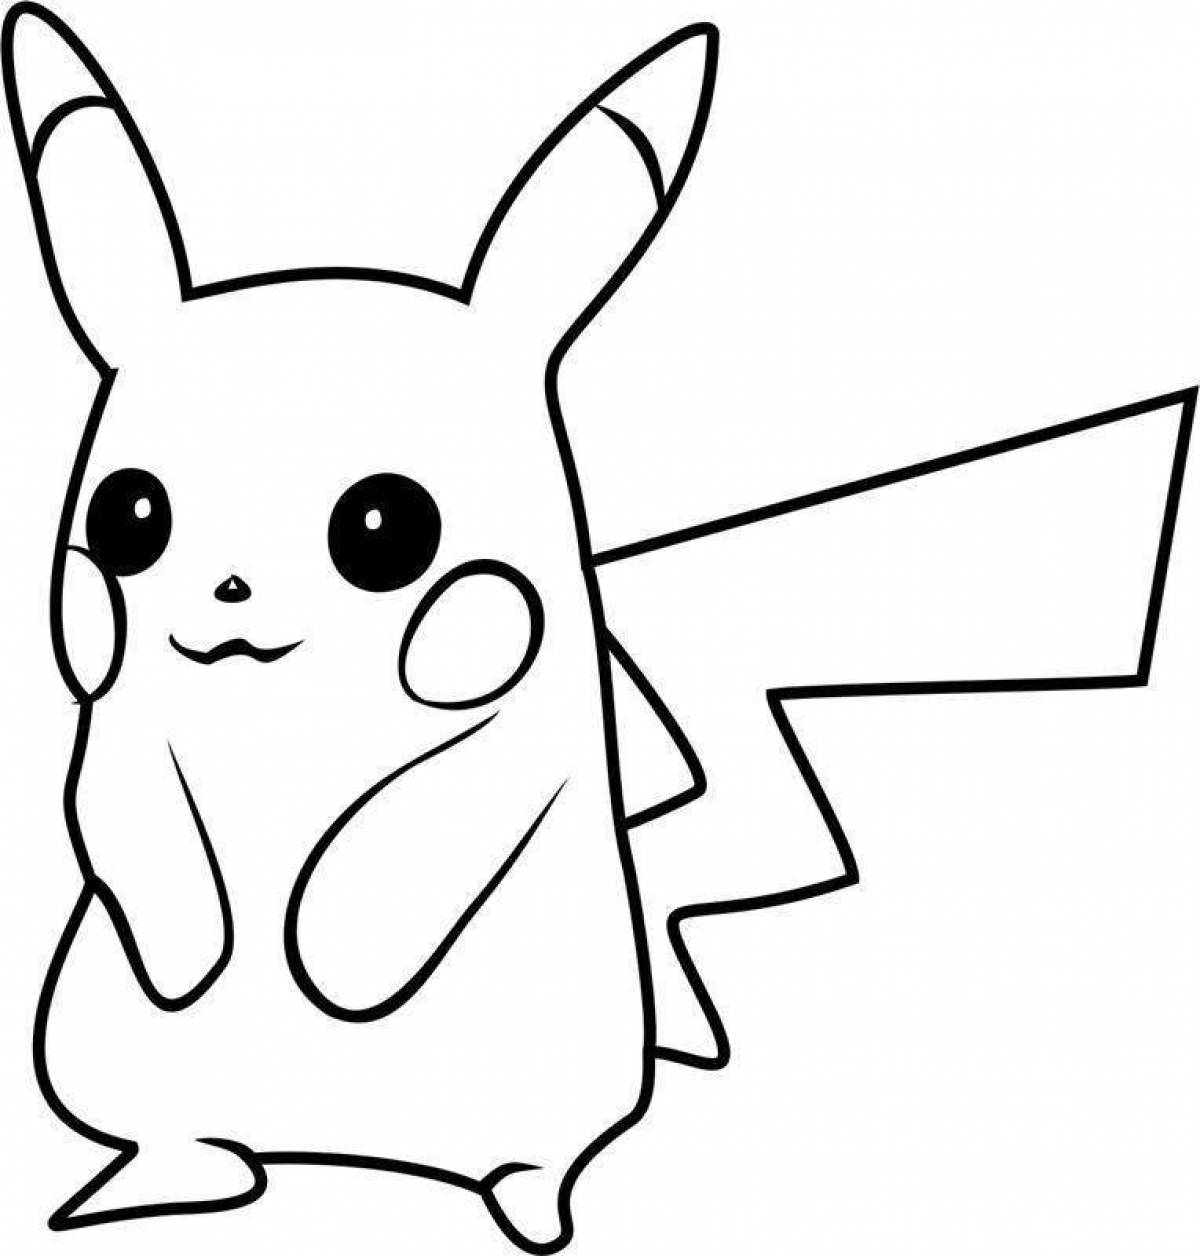 Sweet pikachu coloring pages for girls